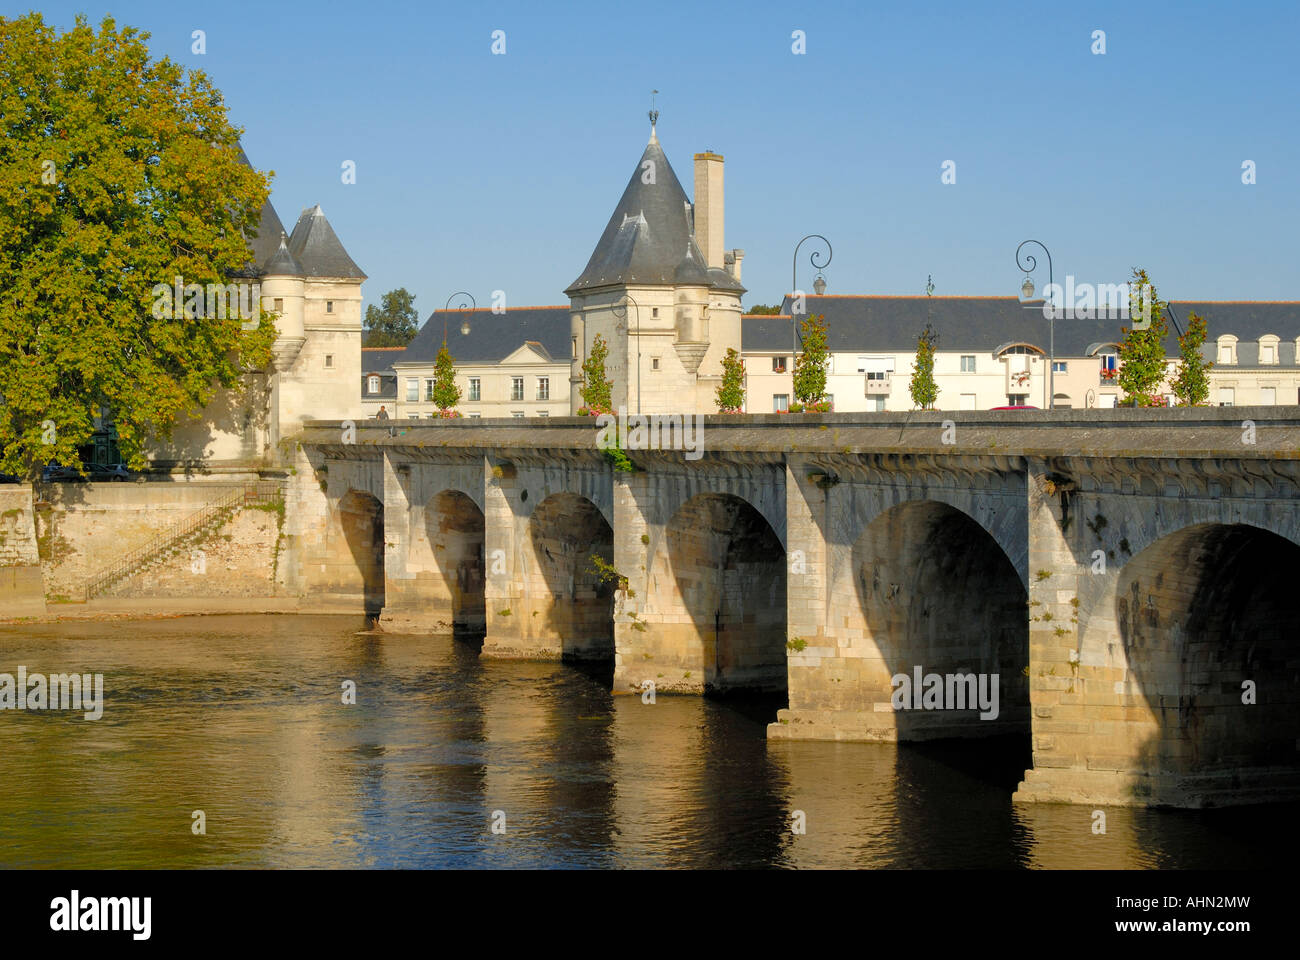 Le Pont Henri Iv Completed 1611 Across The River Vienne Chatellerault France Stock Photo Alamy